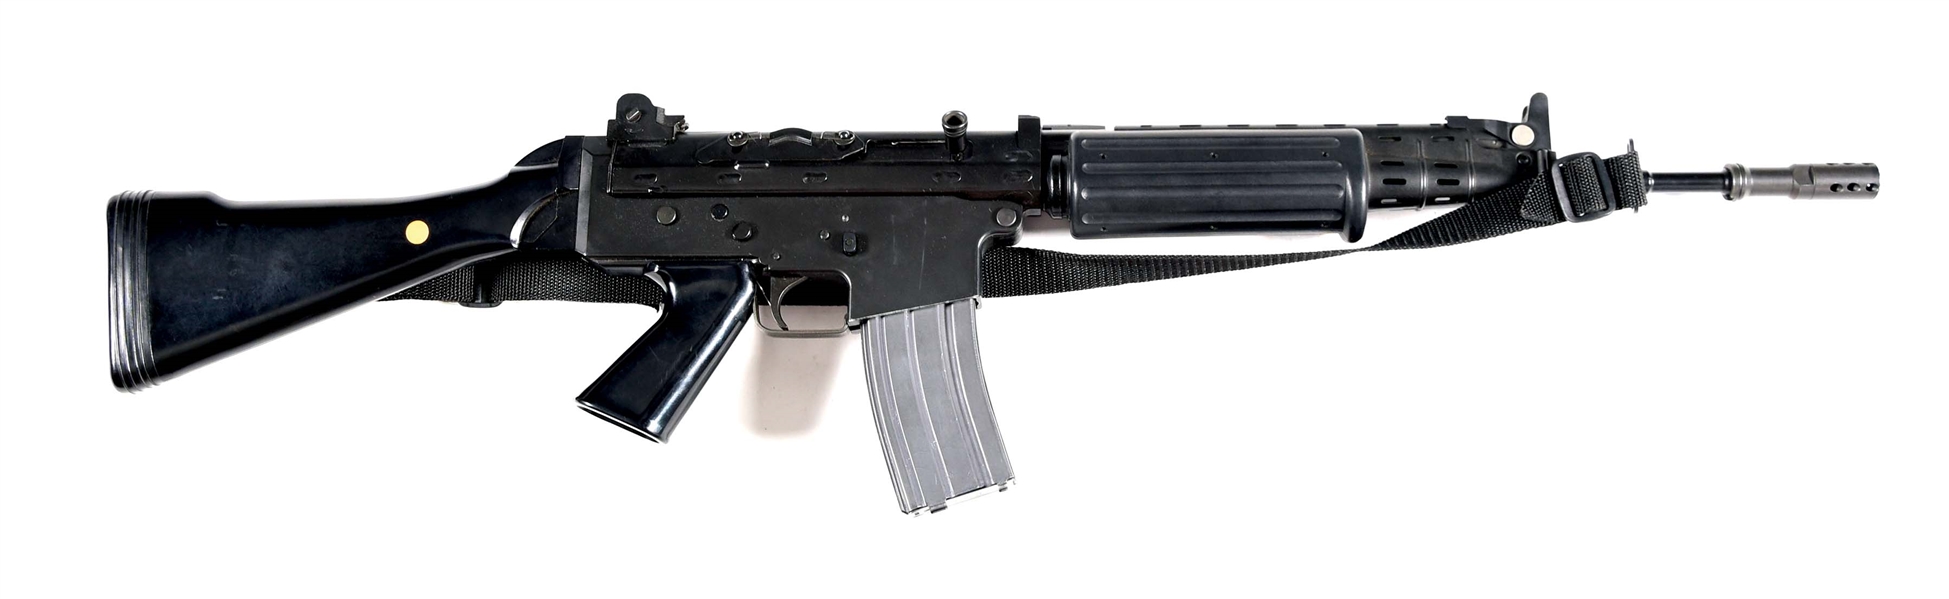 (N) S & H ARMS REGISTERED AUTO SEAR IN FABRIQUE NATIONALE 5.56 MM SEMI-AUTO TO FN-C MACHINE GUN (FULLY TRANSFERABLE).